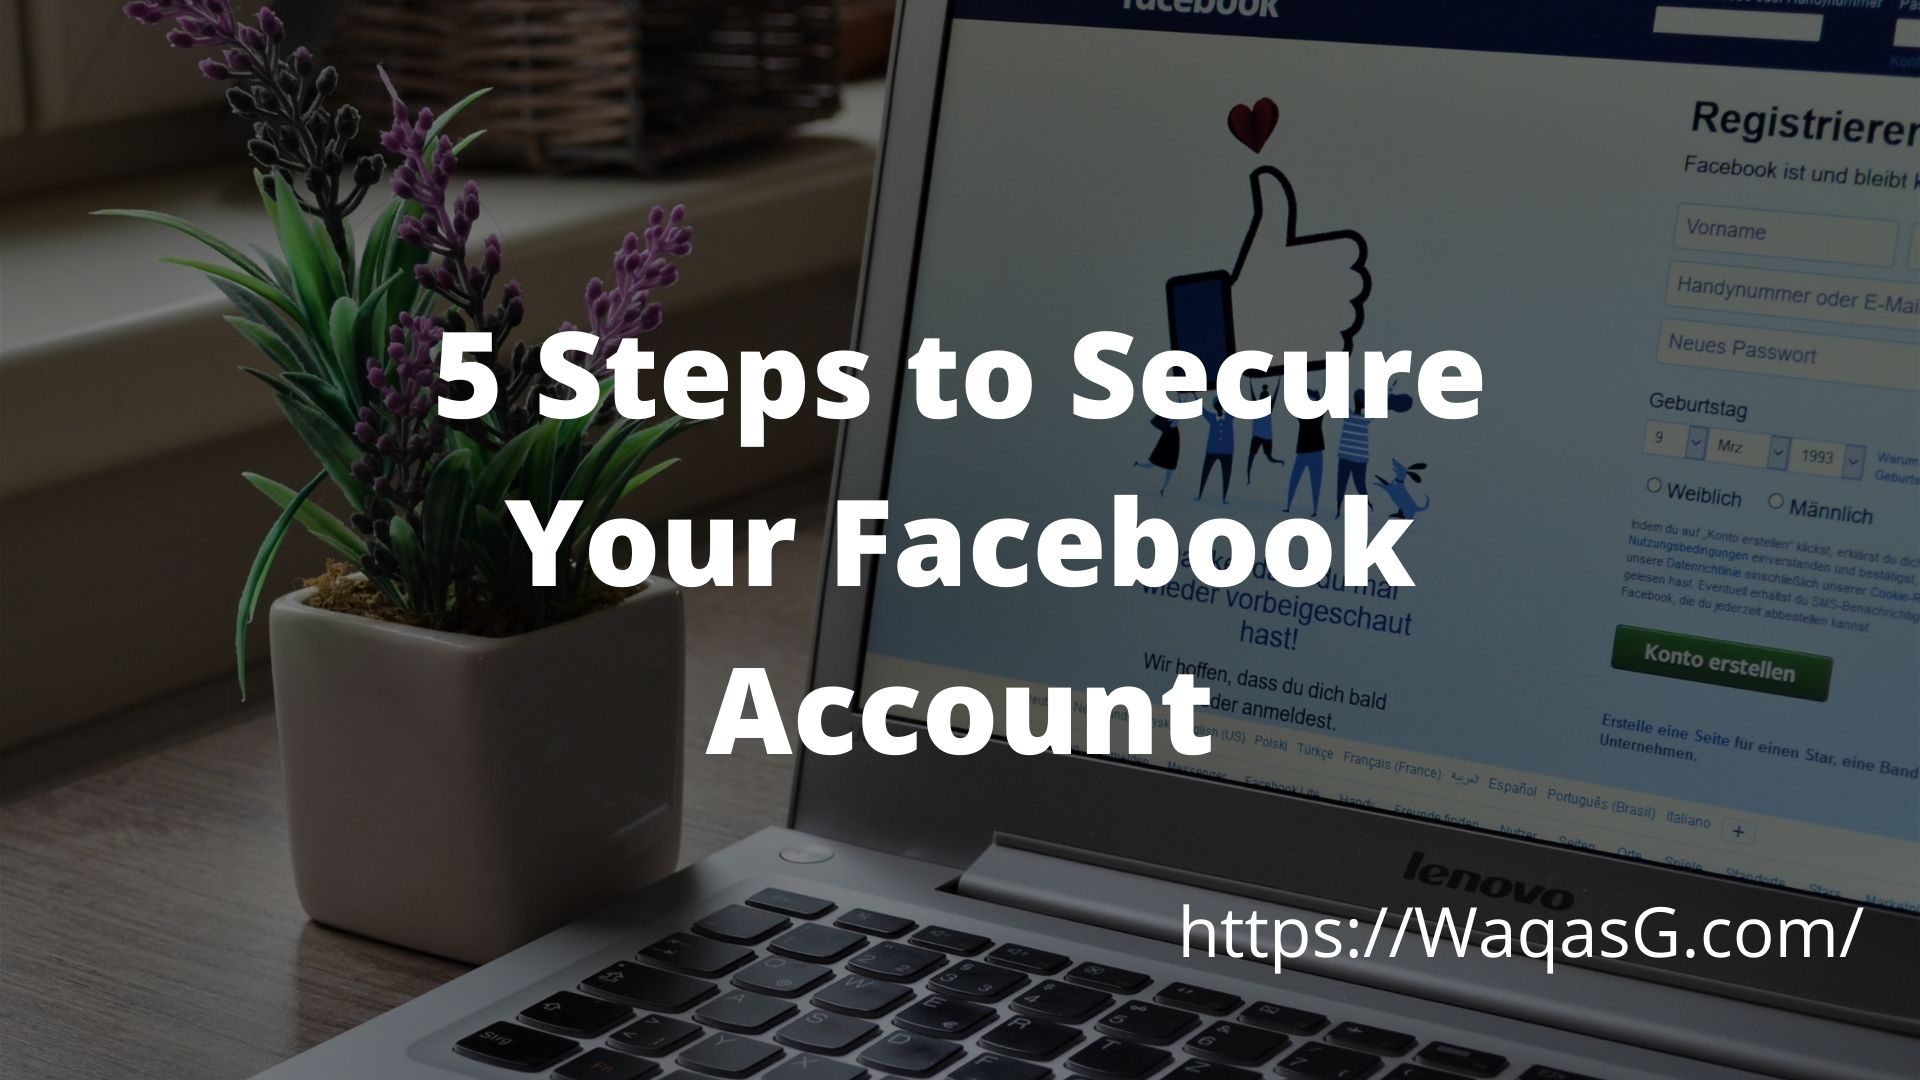 5 Steps to Secure Facebook Account